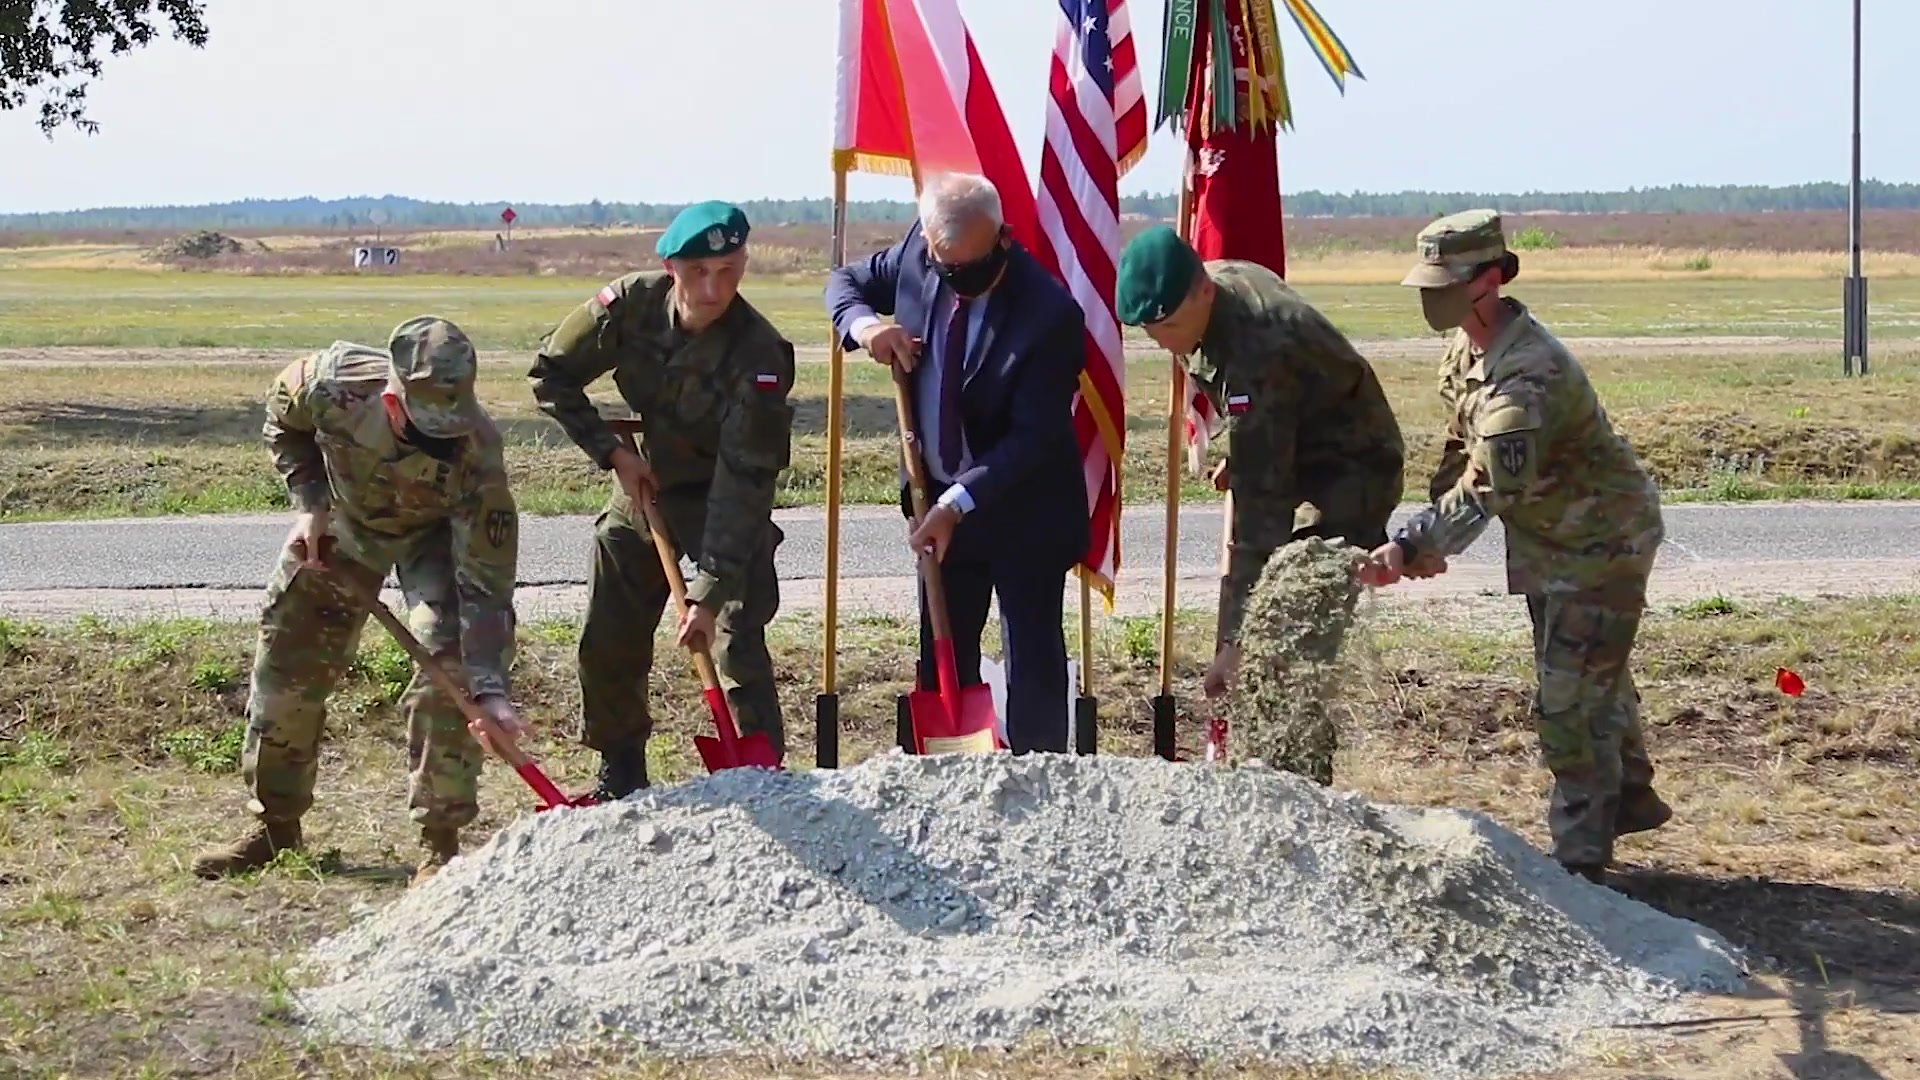 U.S. Army 15th Engineer Battalion and its Polish Allies break ground at the opening ceremony for the U.S. Army Europe-led Resolute Castle 20 at Karliki, Poland, August 13, 2020. The mission is a U.S. Army Europe engineering exercise occurring from August 10 – September 8, 2020; it provides engineering training opportunities with the mission of completing construction projects intended to improve existing host nation infrastructure, which includes the construction of an intermediate staging base, forward arming and refueling point maintenance, the clearing of a helicopter landing zone, and the improvement of a railhead byway and range road at Camp Trezbien, Poland. Additionally, the improvements will include the construction of a general purpose warehouse in Karliki, Poland, and the construction of a fuel system supply point at Drawsko Pomorskie Training Area, Poland. (U.S. Army video by Sgt. 1st Class Timothy Hughes and Pfc. Raekwon Jenkins)

Order of appearance:

U.S. Army Lt. Col. Jessica Goffena, commander, 15th Engineer Battalion; Polish Land Forces Maj. Krzysztof Krezel, chief of training of Training Assessment Group; U.S. Army Col. Timothy MacDonald, commander, 18th Military Police Brigade; and U.S. Army Sgt. Joe Ruiz, horizontal engineer, 902nd Engineer Construction Company, 15th Engineer Battalion